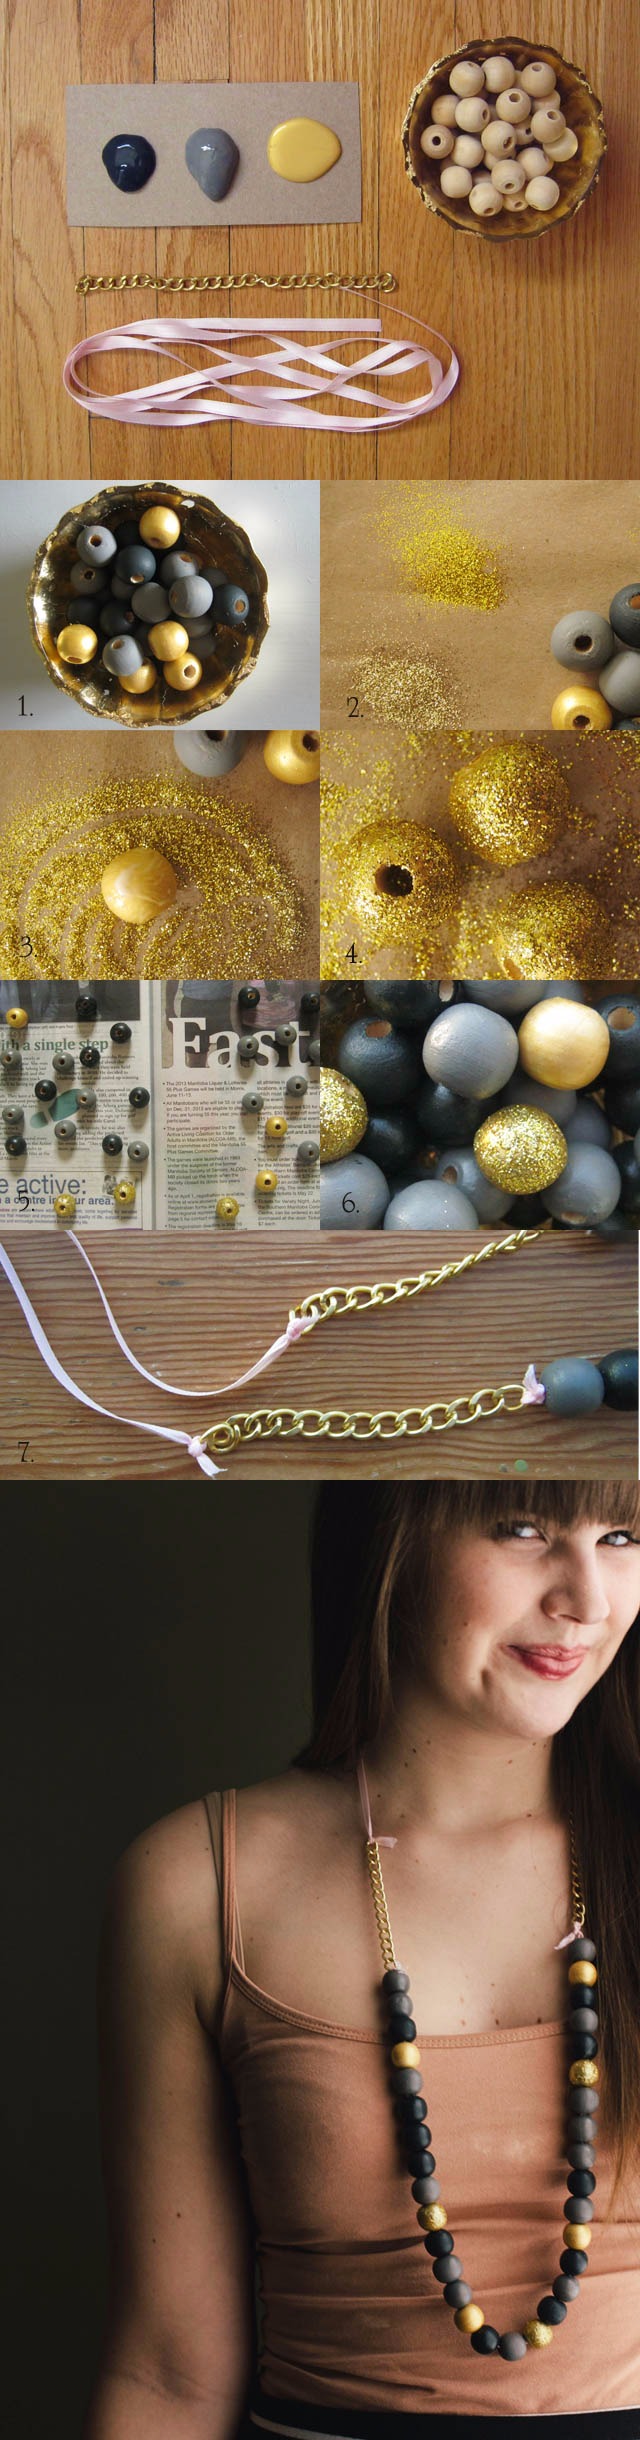 DIY Painted Wood Bead Necklace